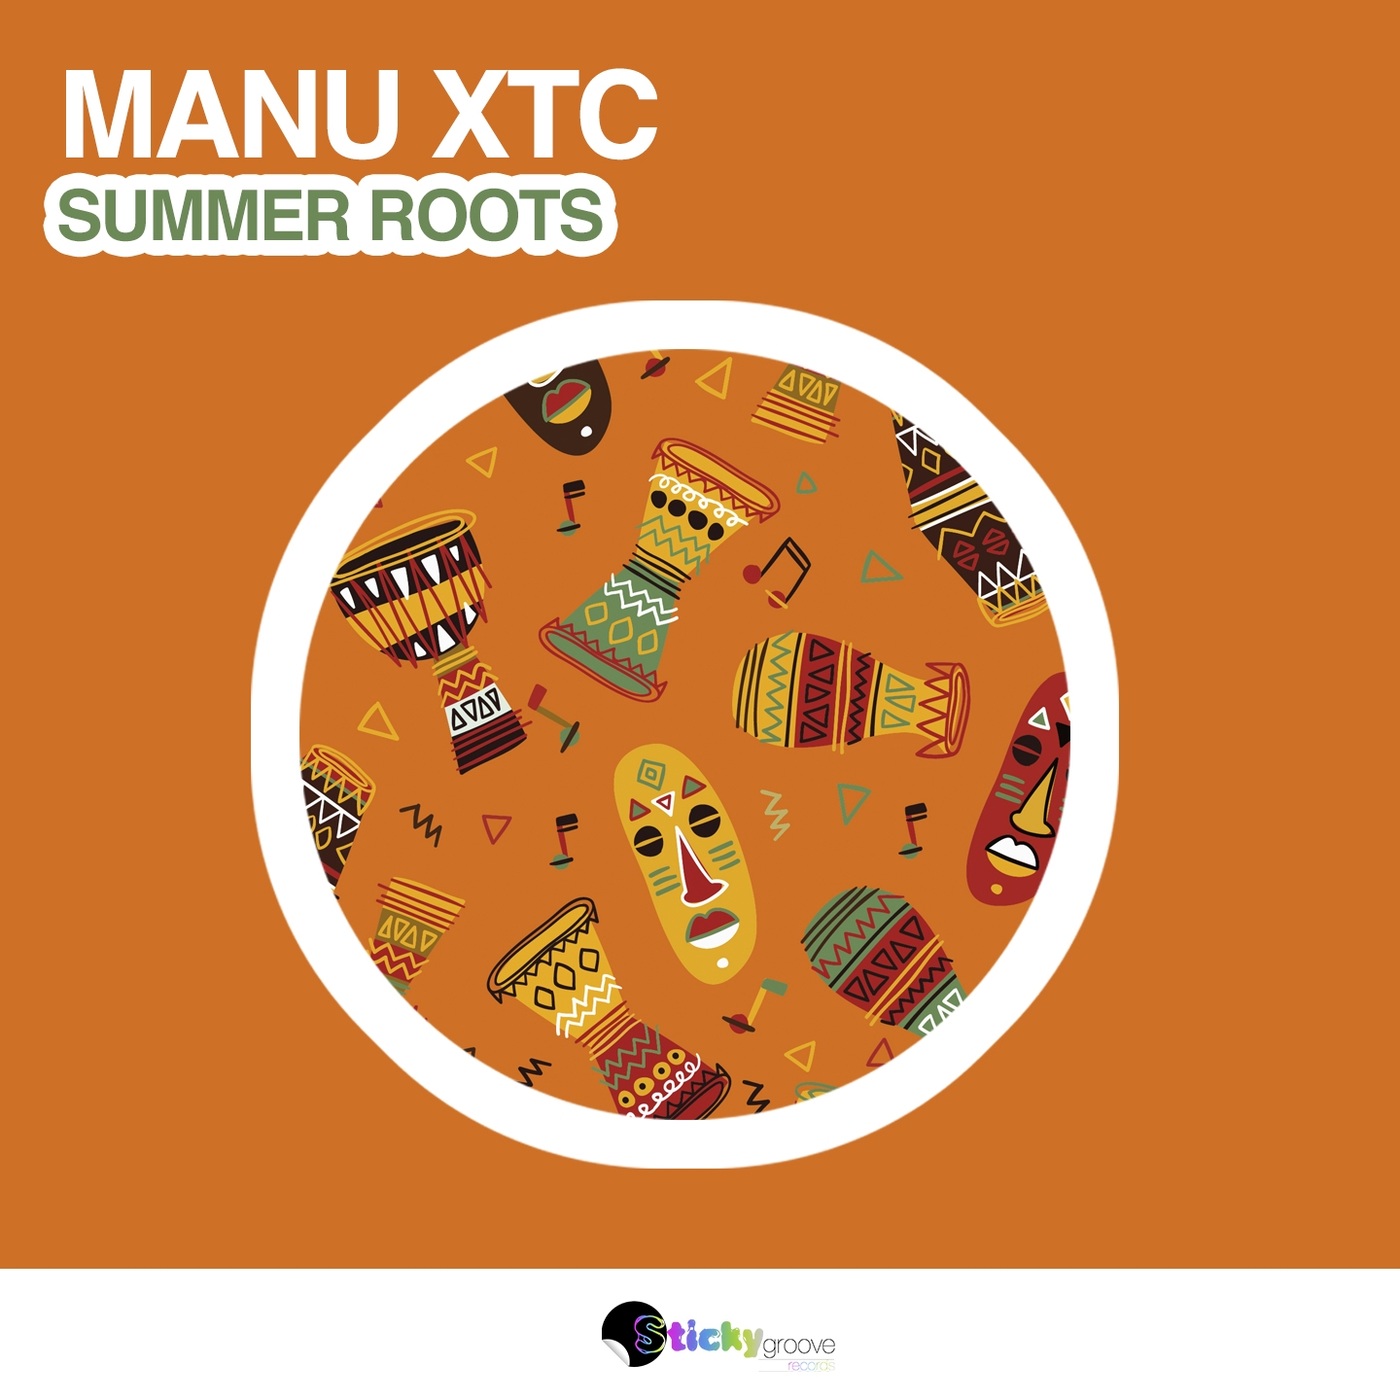 Manu XTC - Summer Roots / Sticky Groove